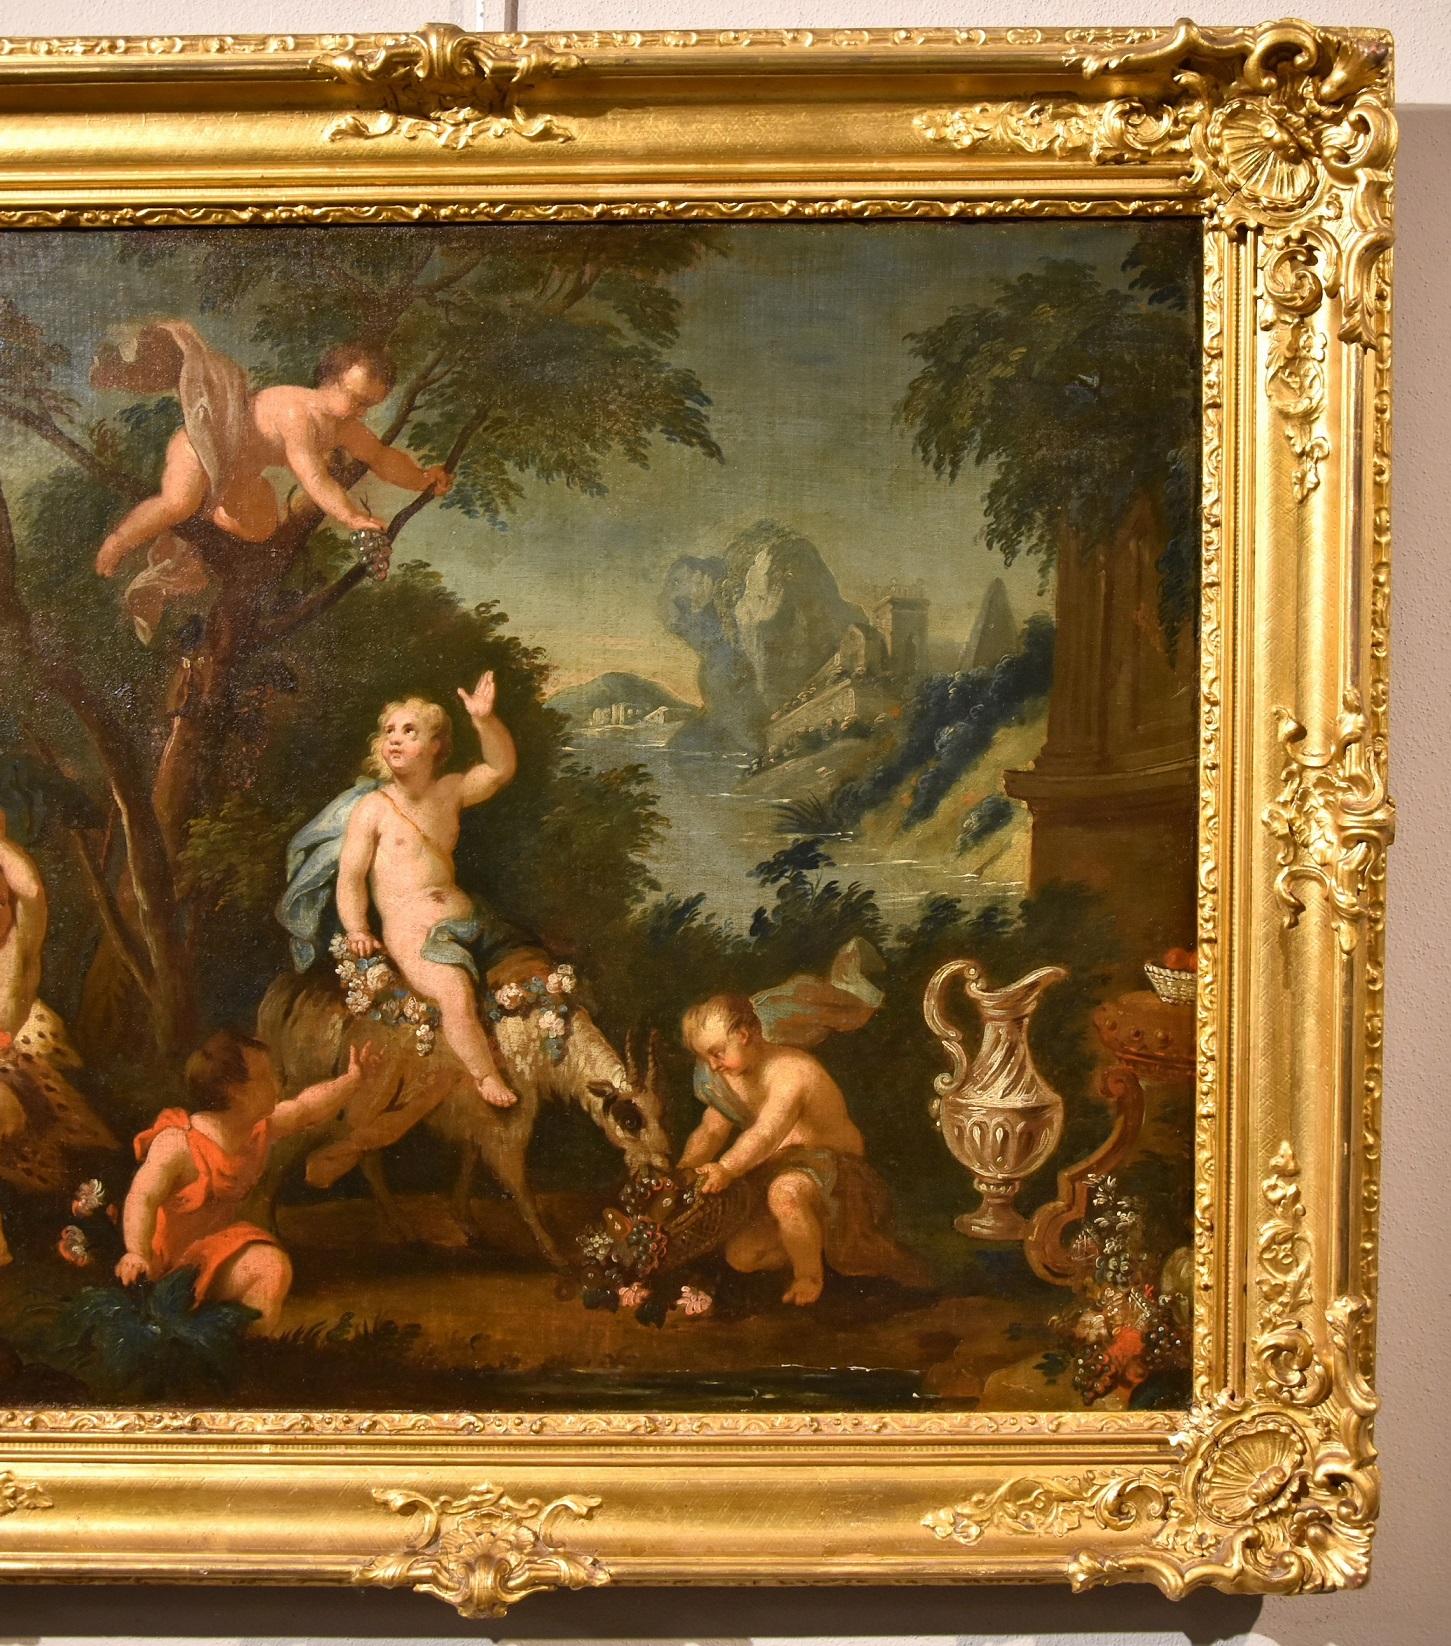 Painter active in Rome in the second half of the seventeenth century
Circle of Abraham Brueghel (Antwerp, 1631 - Naples, 1697)
Feast of cherubs in a landscape

Oil painting on canvas
67 x 83 cm., Framed 86 x 99 cm.

This valuable painting, made in